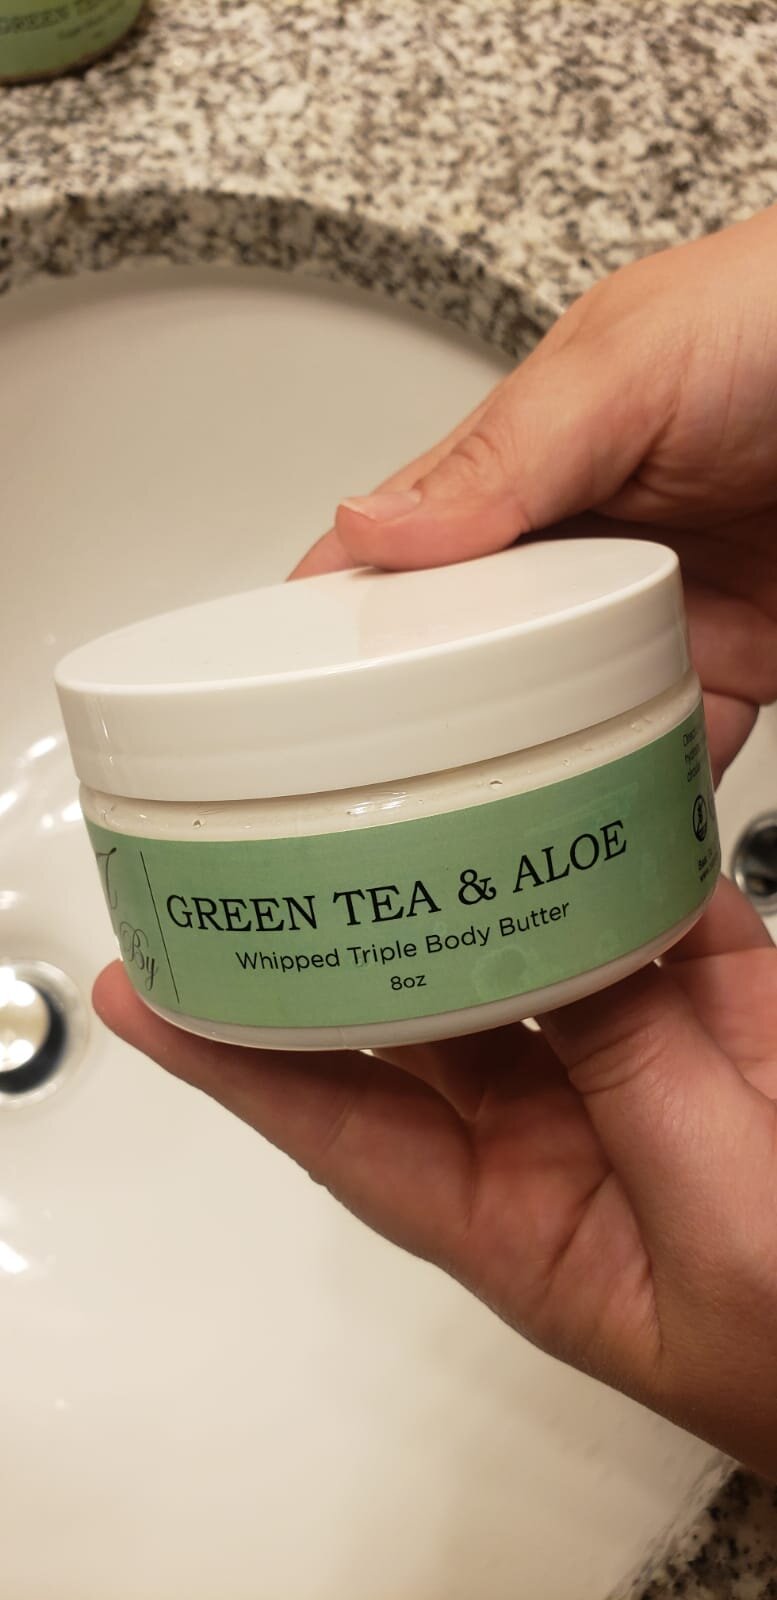 Green Tea and Aloe Whipped Body Butter - Body By J